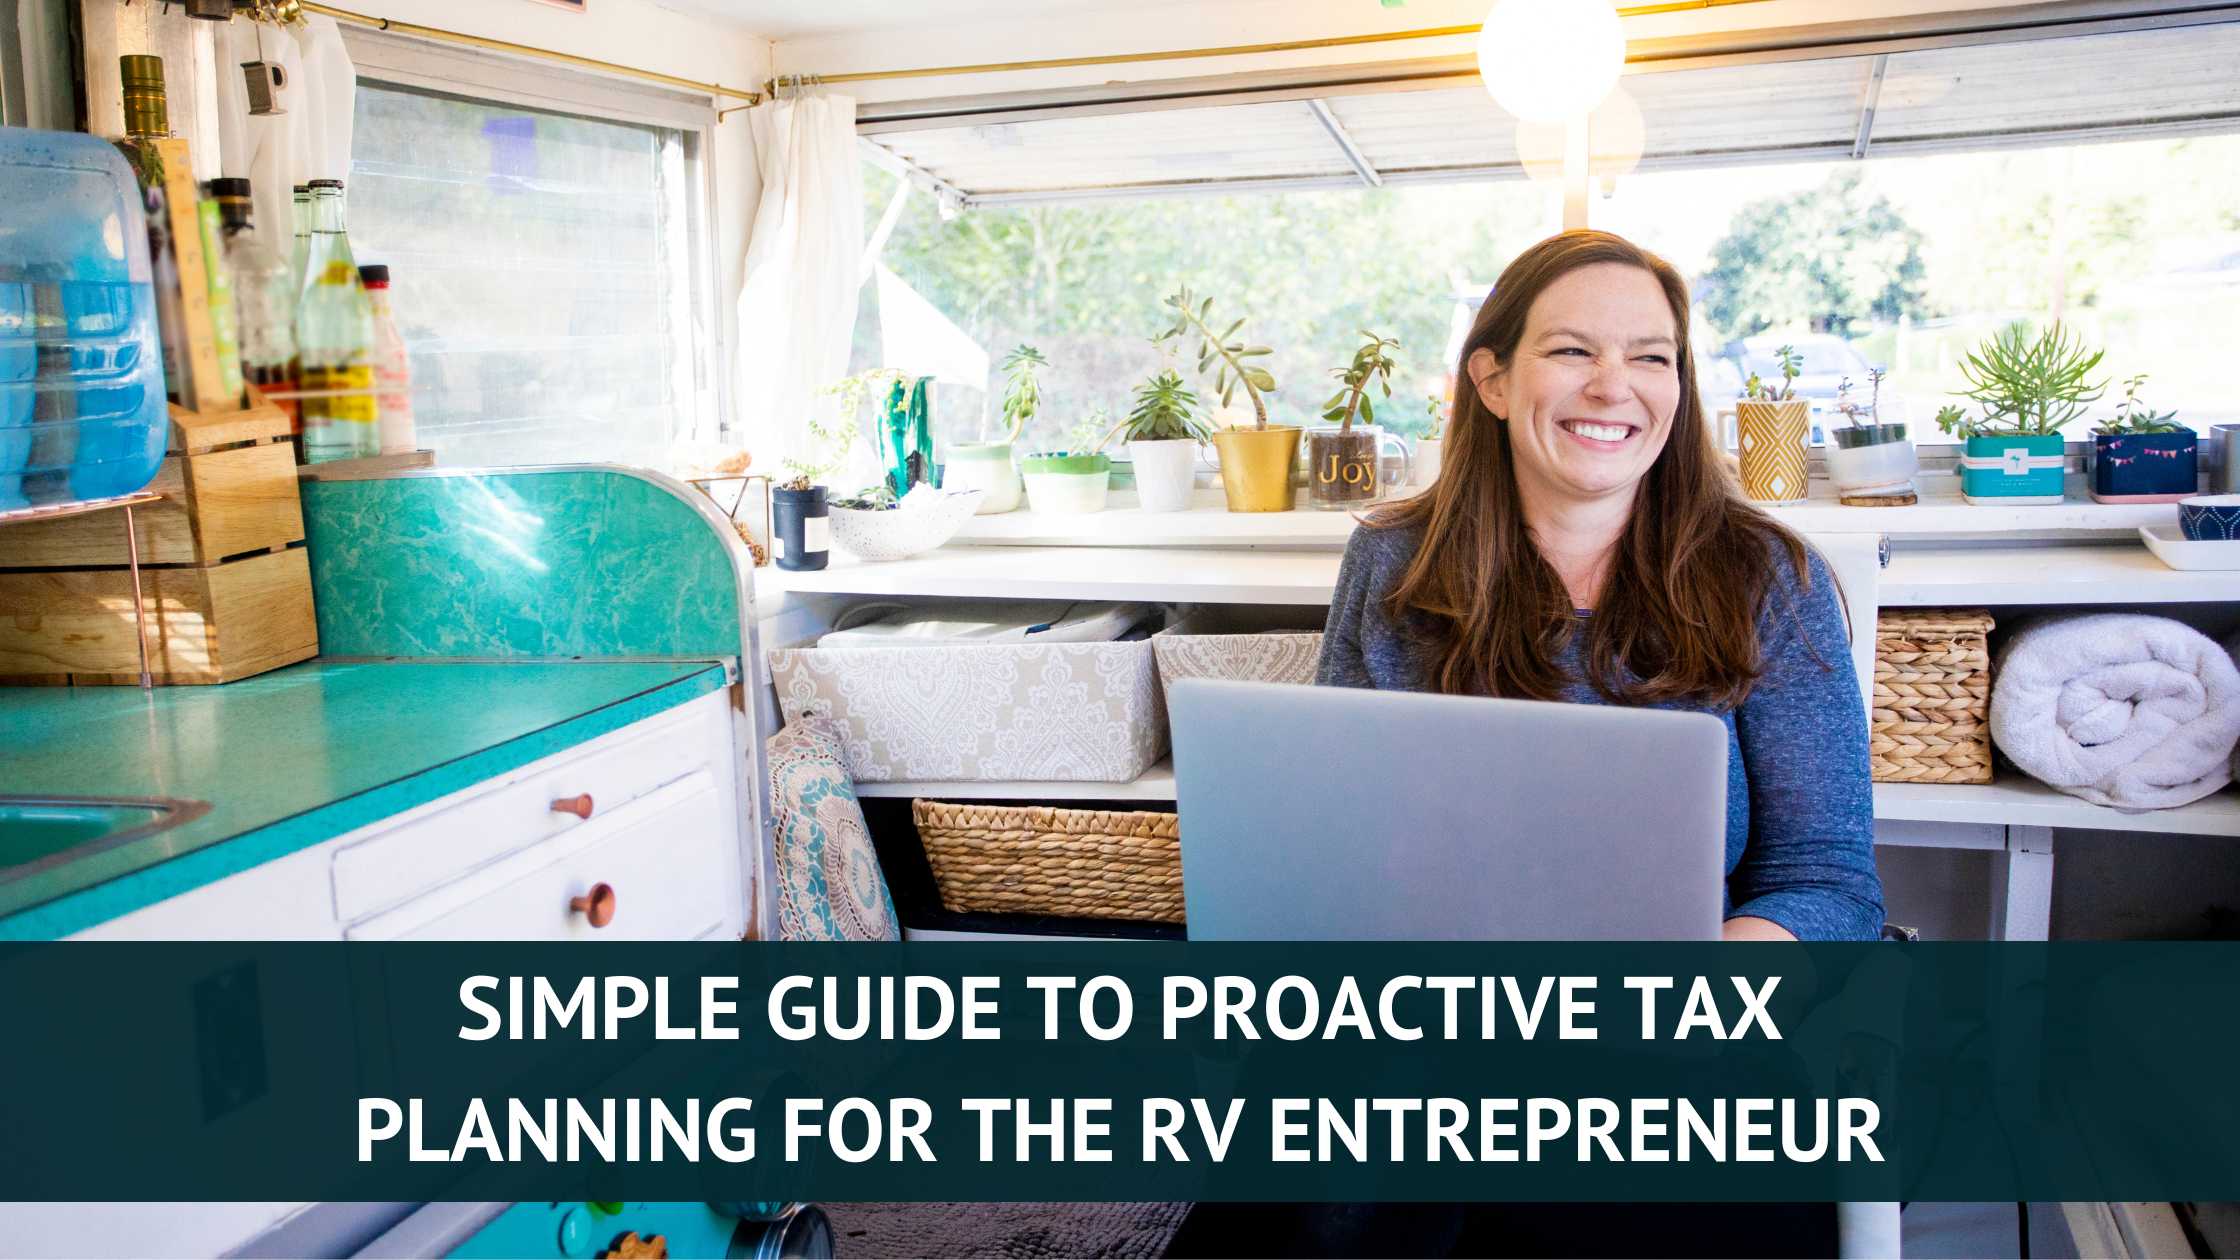 Tax Planning for the RV Entrepreneur Tax Queen